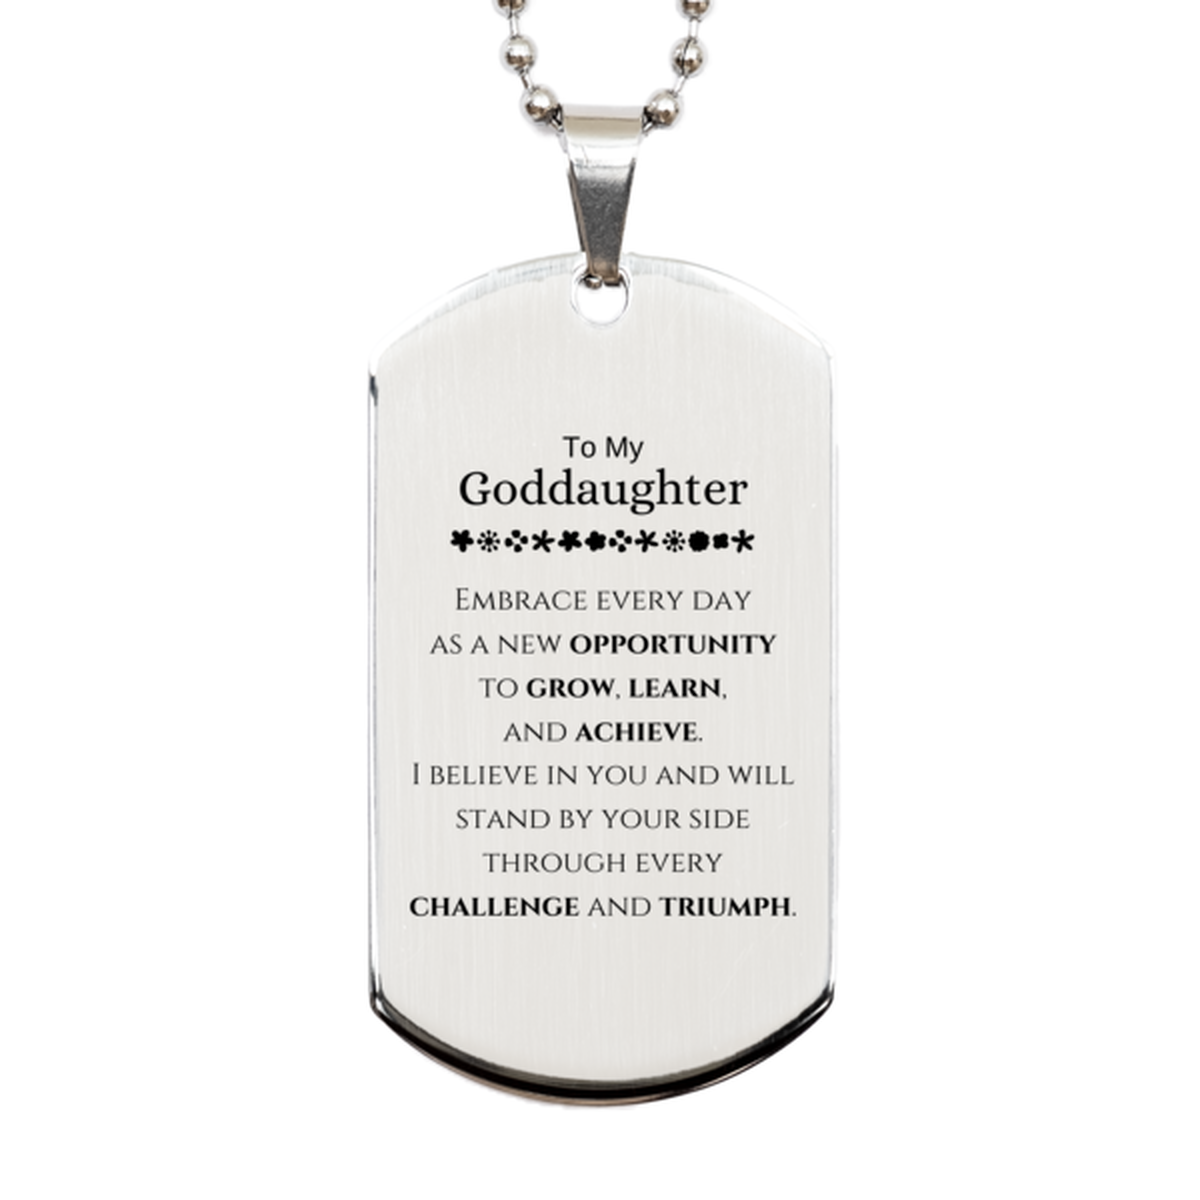 To My Goddaughter Gifts, I believe in you and will stand by your side, Inspirational Silver Dog Tag For Goddaughter, Birthday Christmas Motivational Goddaughter Gifts